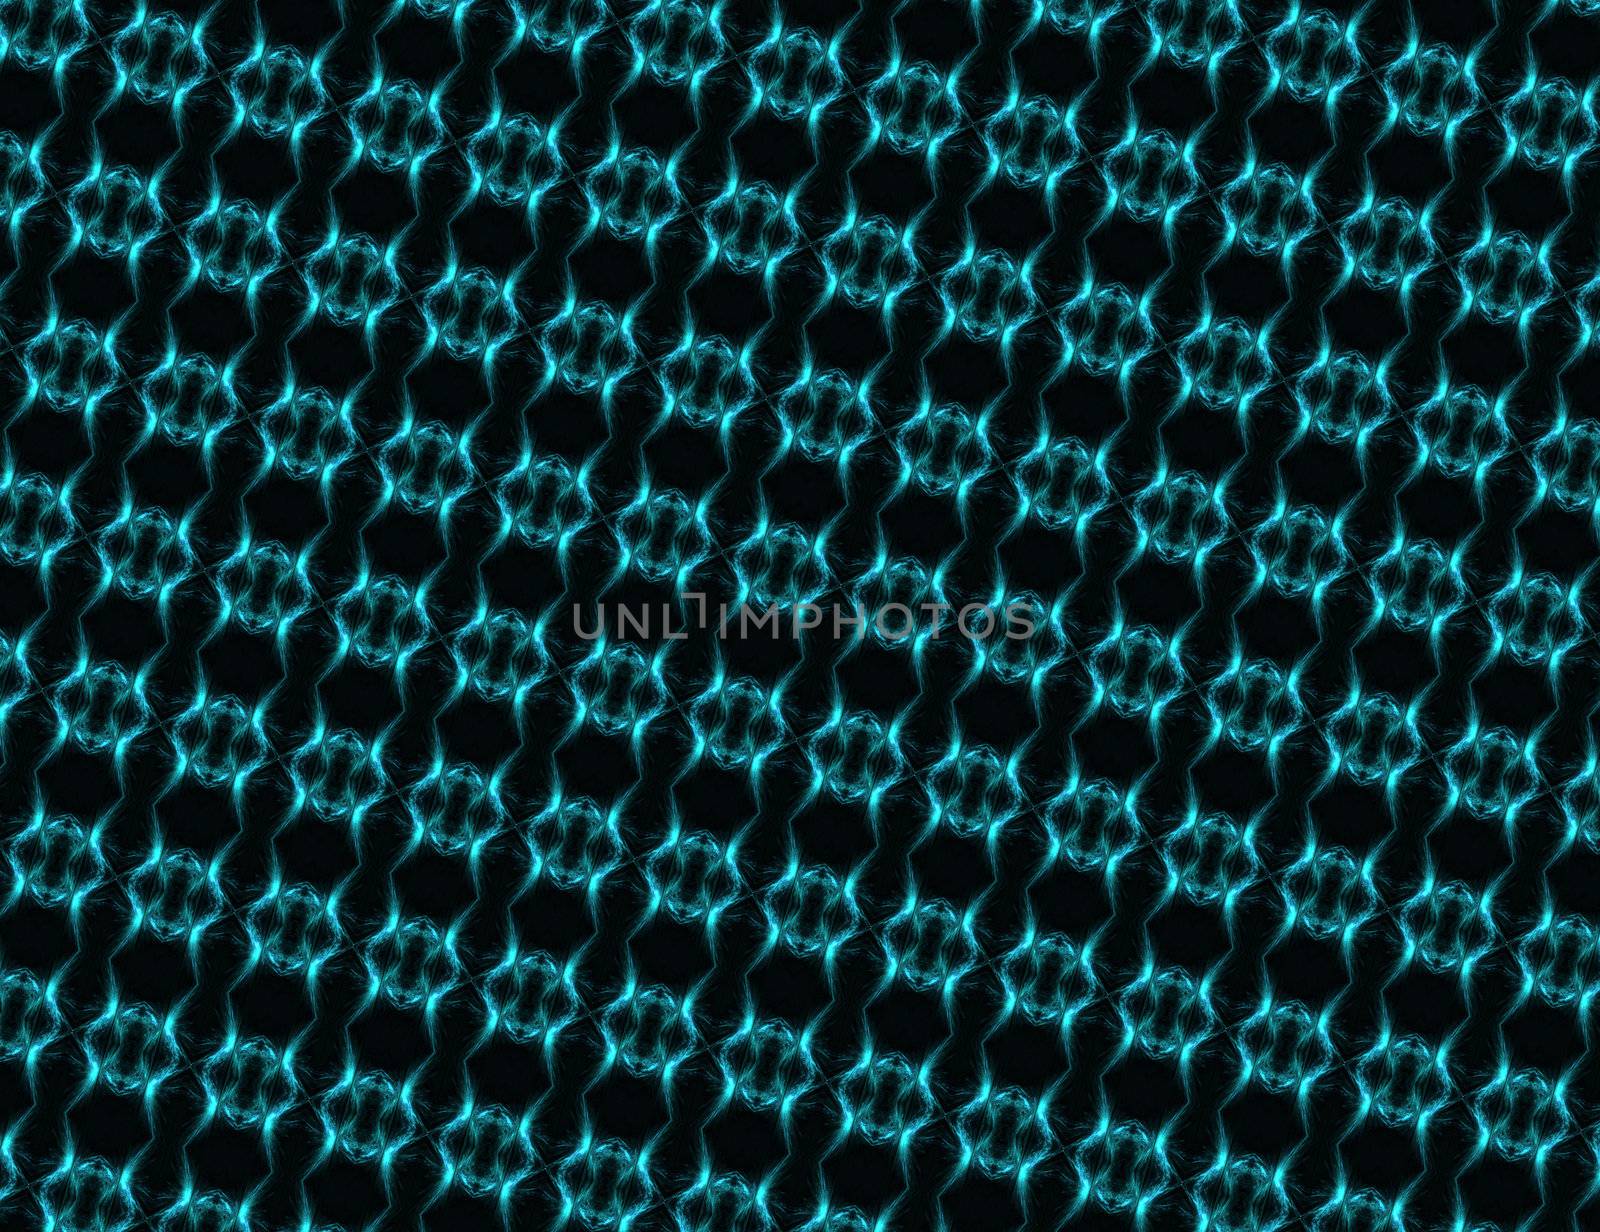 black background tile with binary look and feel but no 0's and 1's ;-)